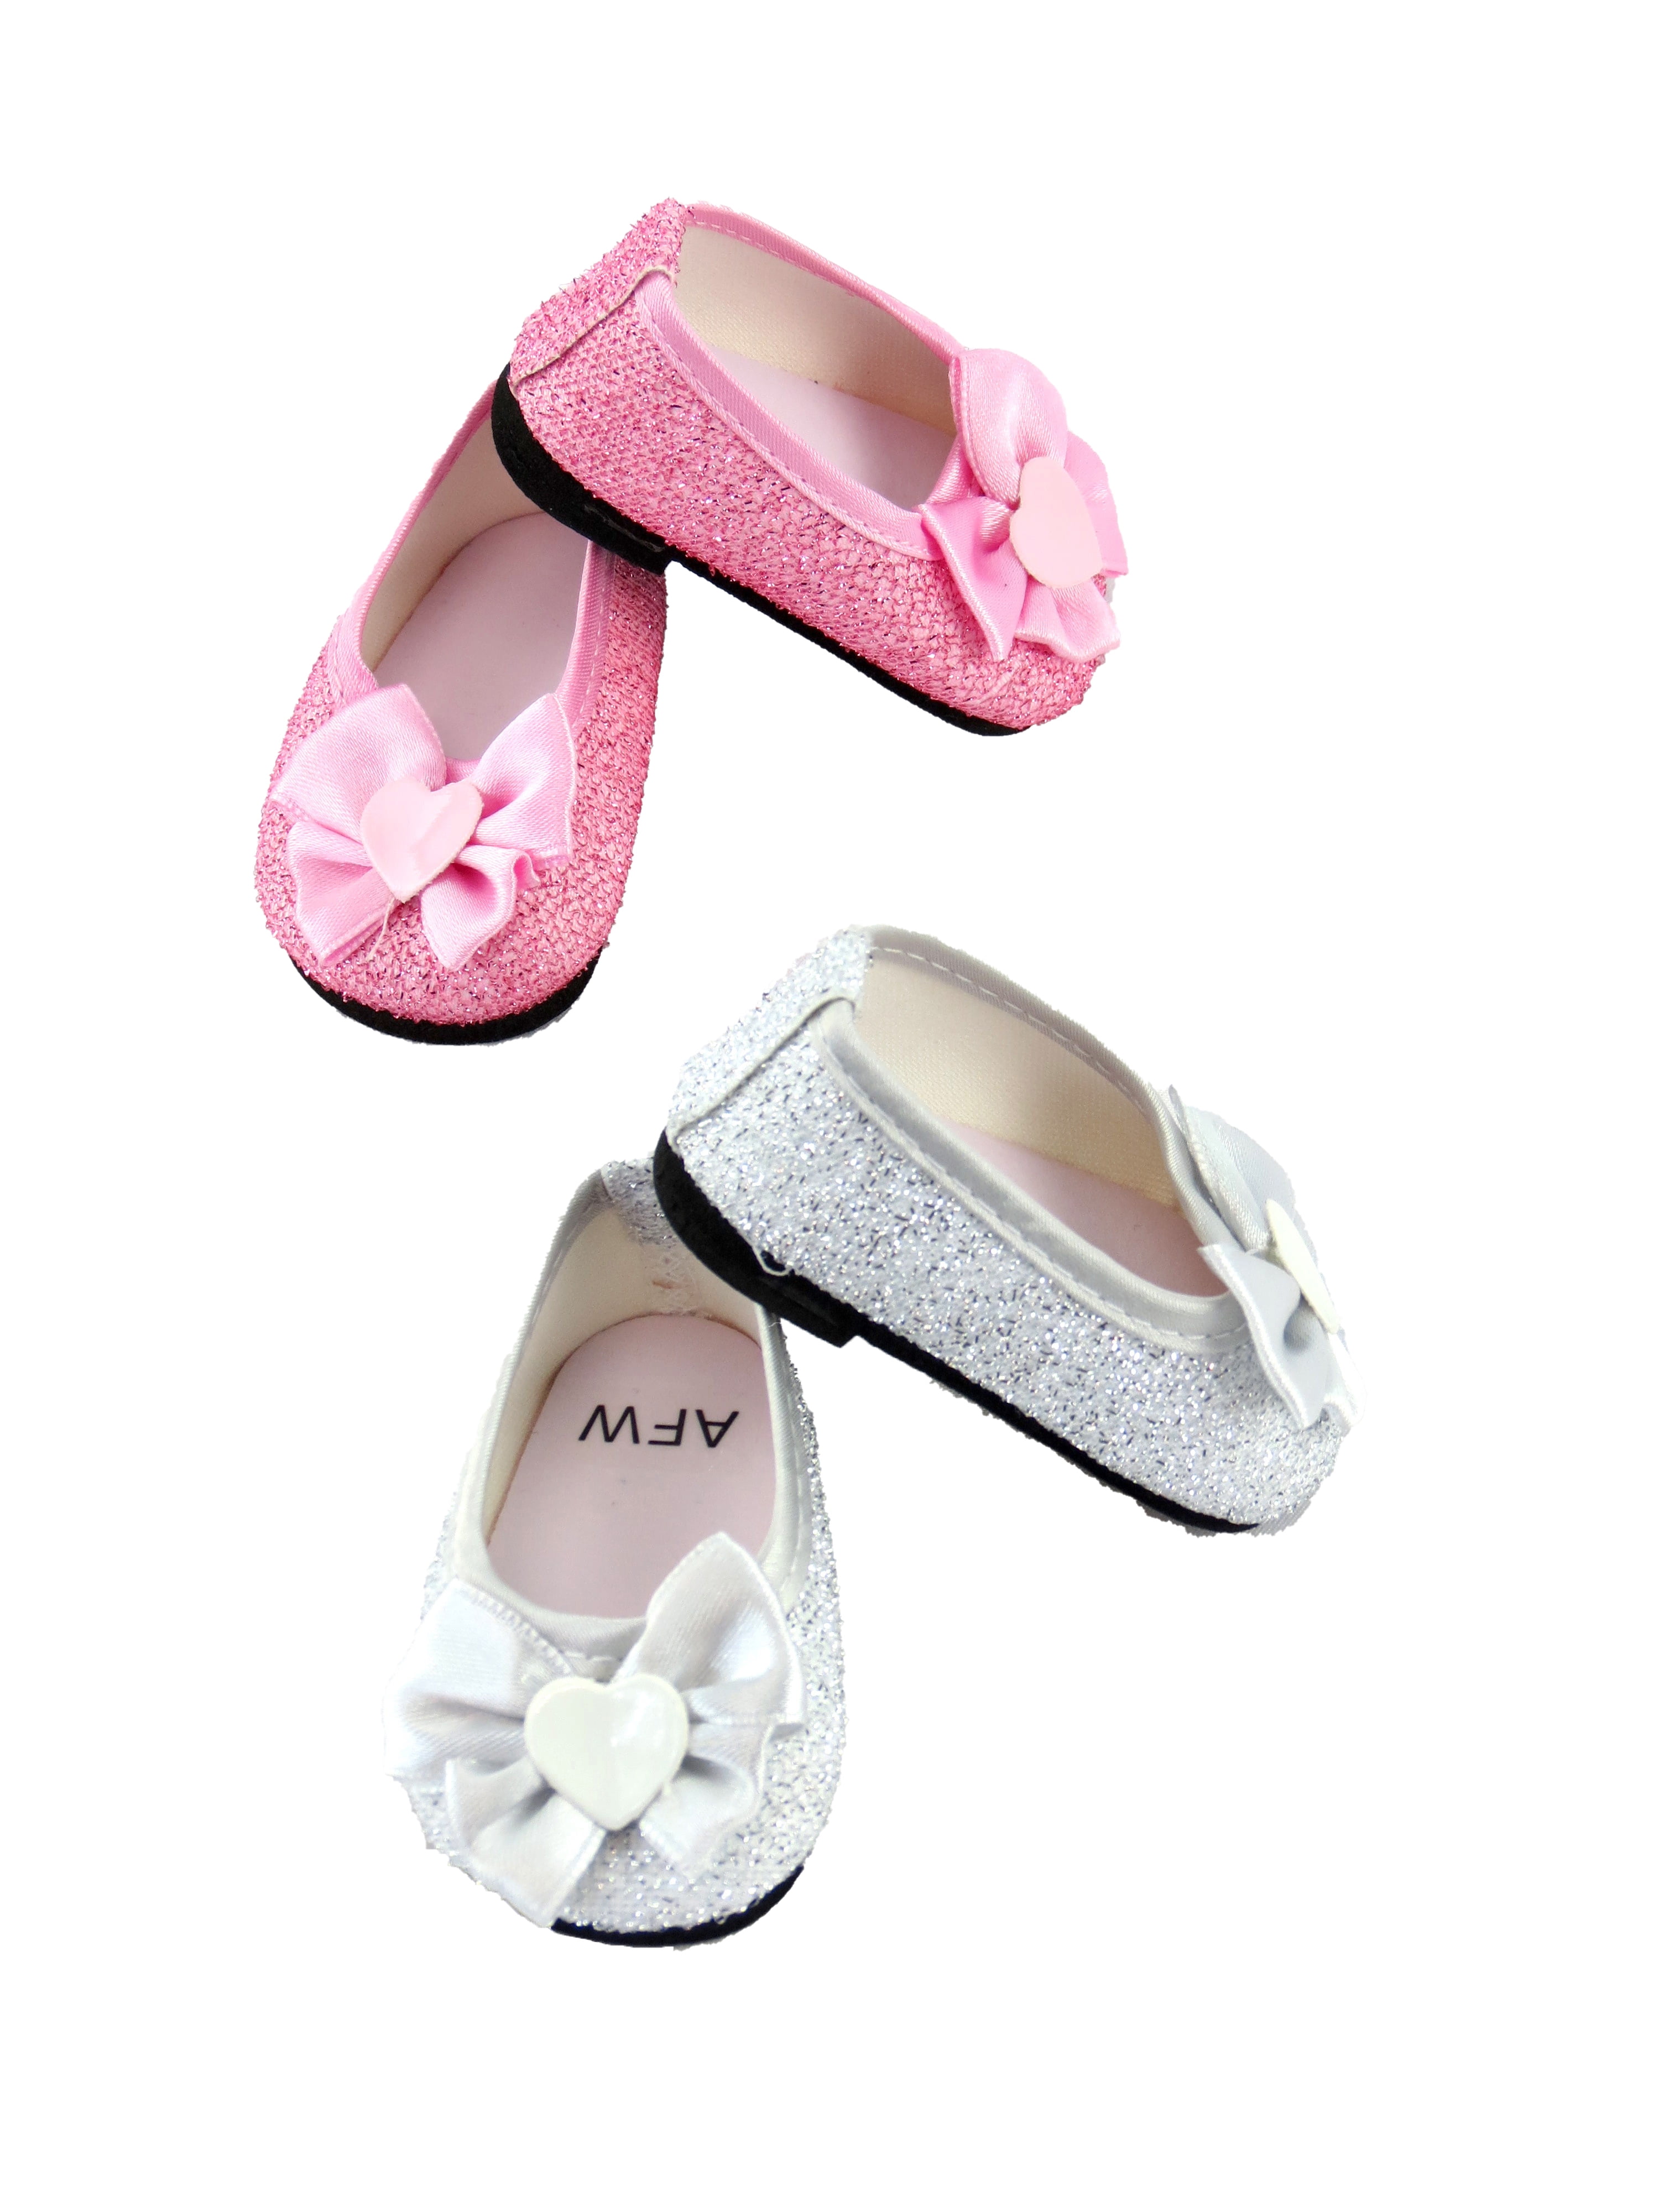 18" Doll Clothes Gllitter Bow Shoes for 18" Doll Glitter Shoes Flats